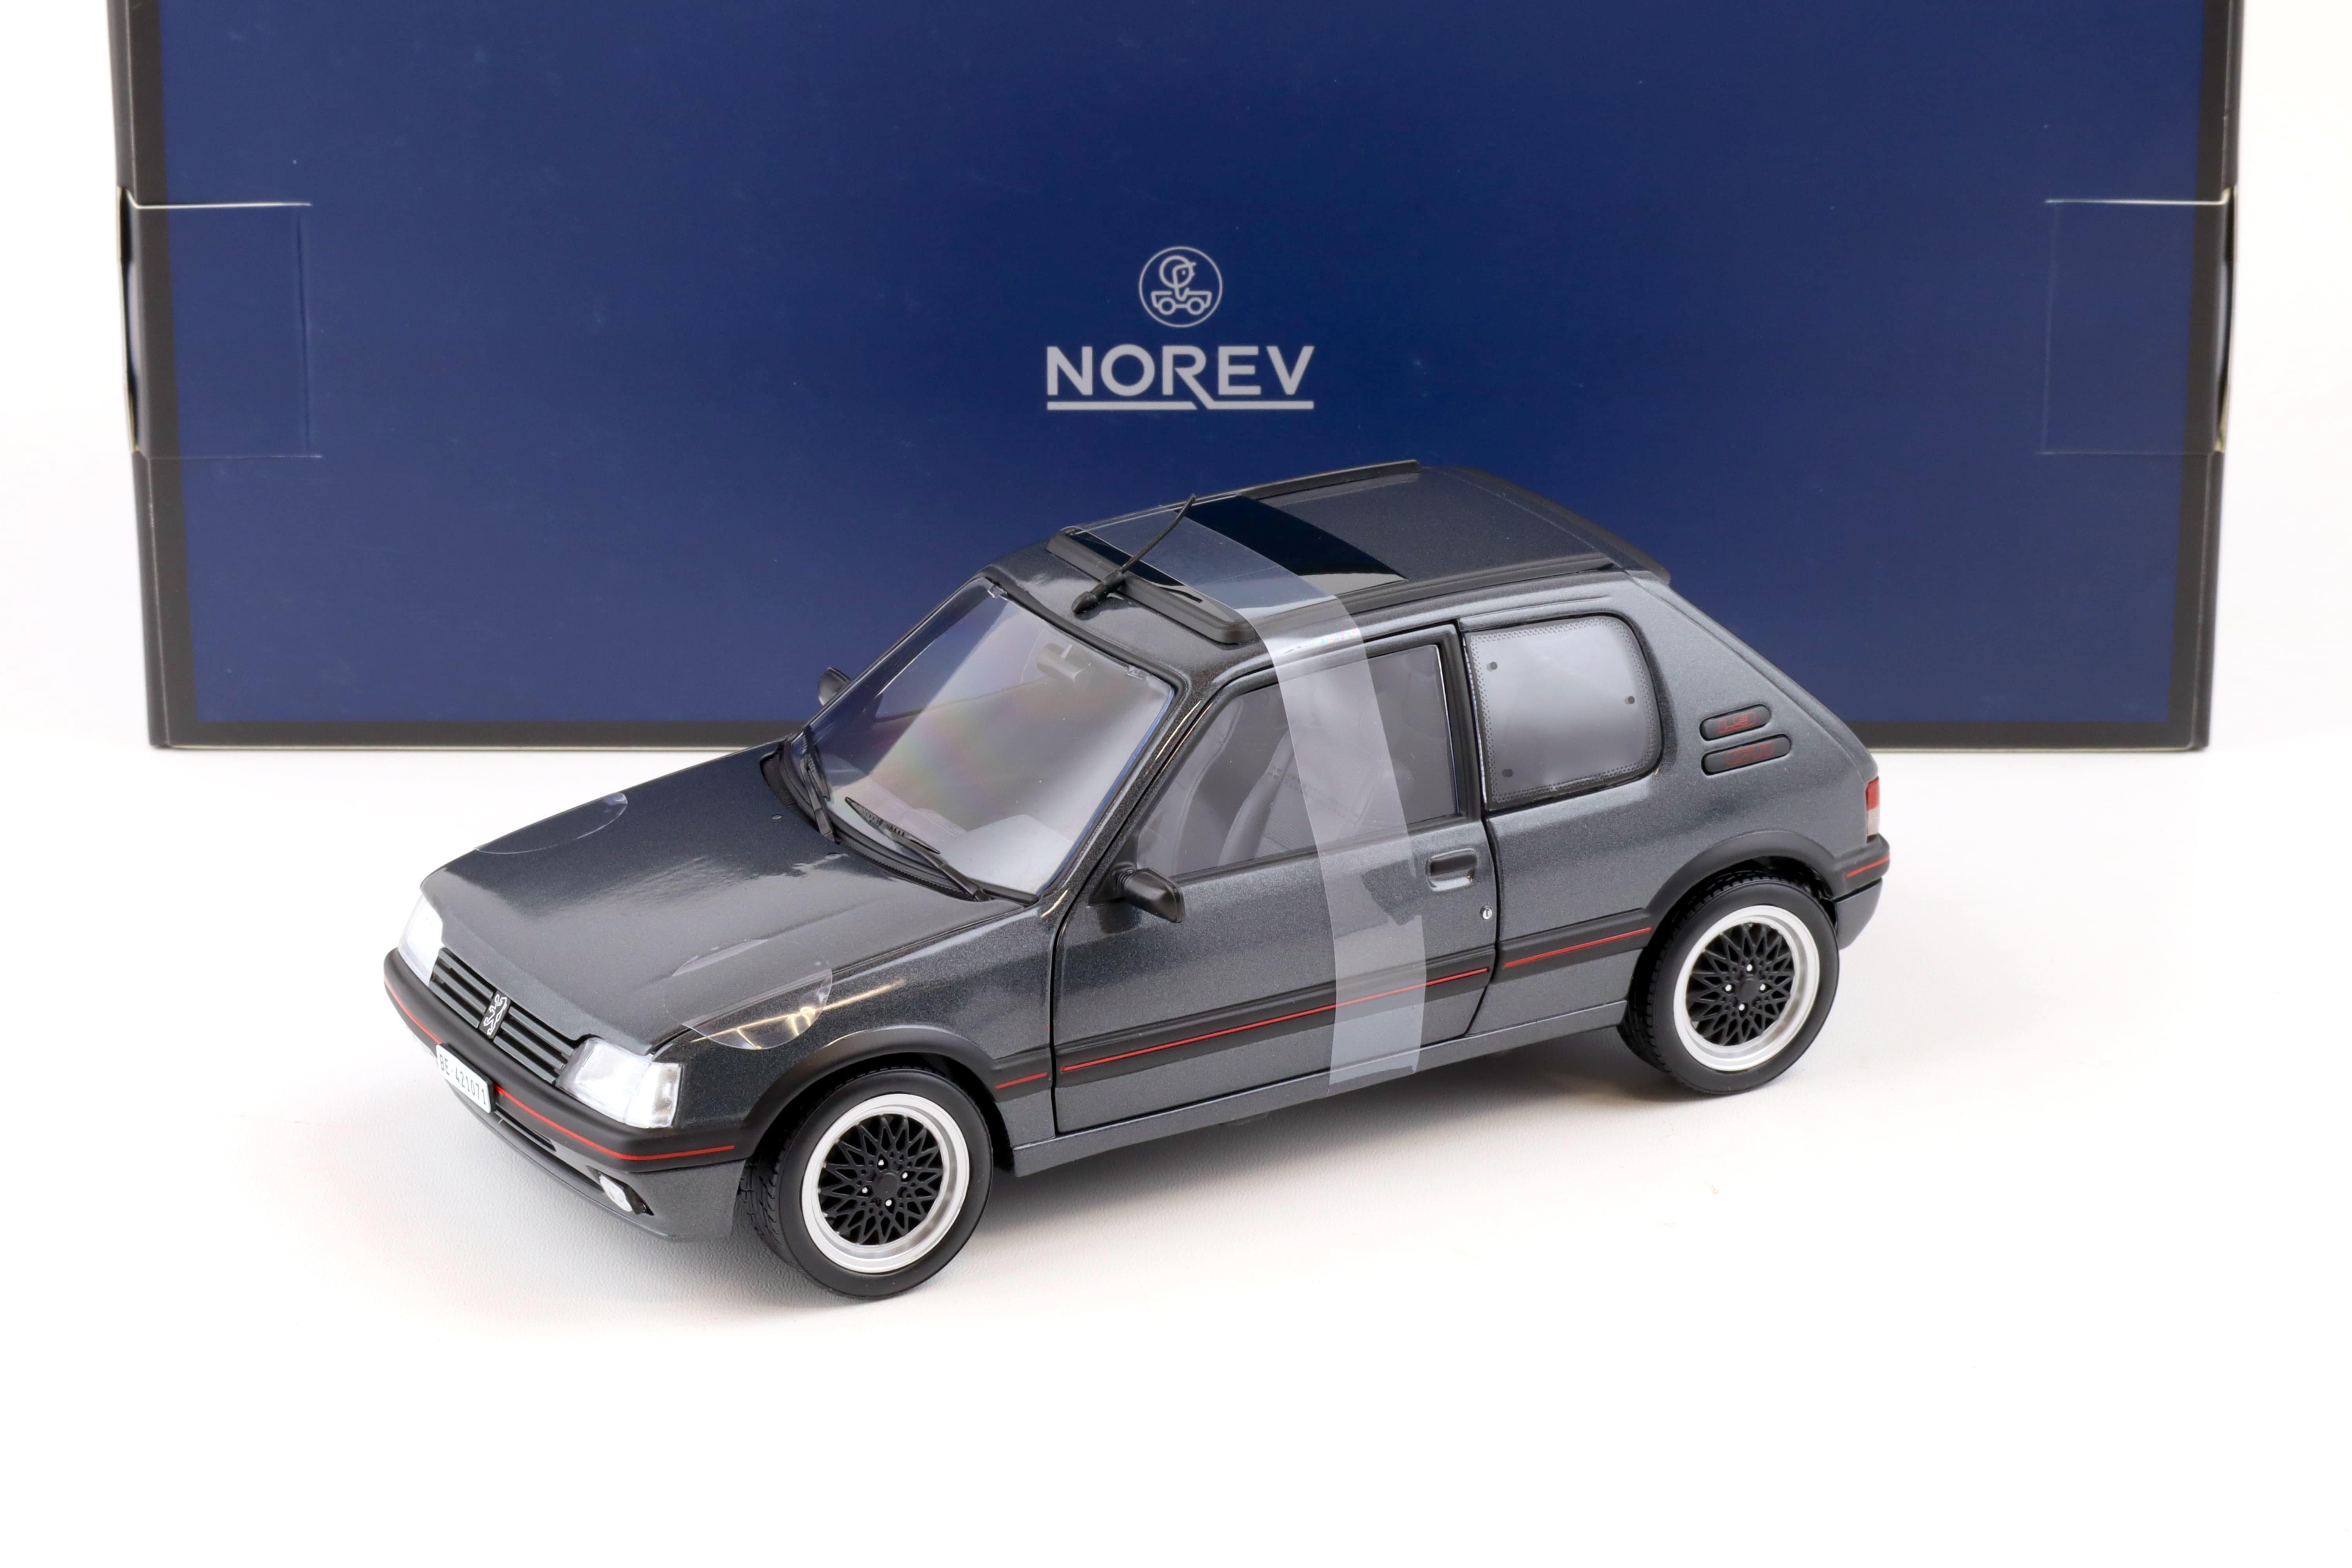 1:18 Norev Peugeot 205 GTi Collection 1992 graphite grey - Limited 300 pcs.